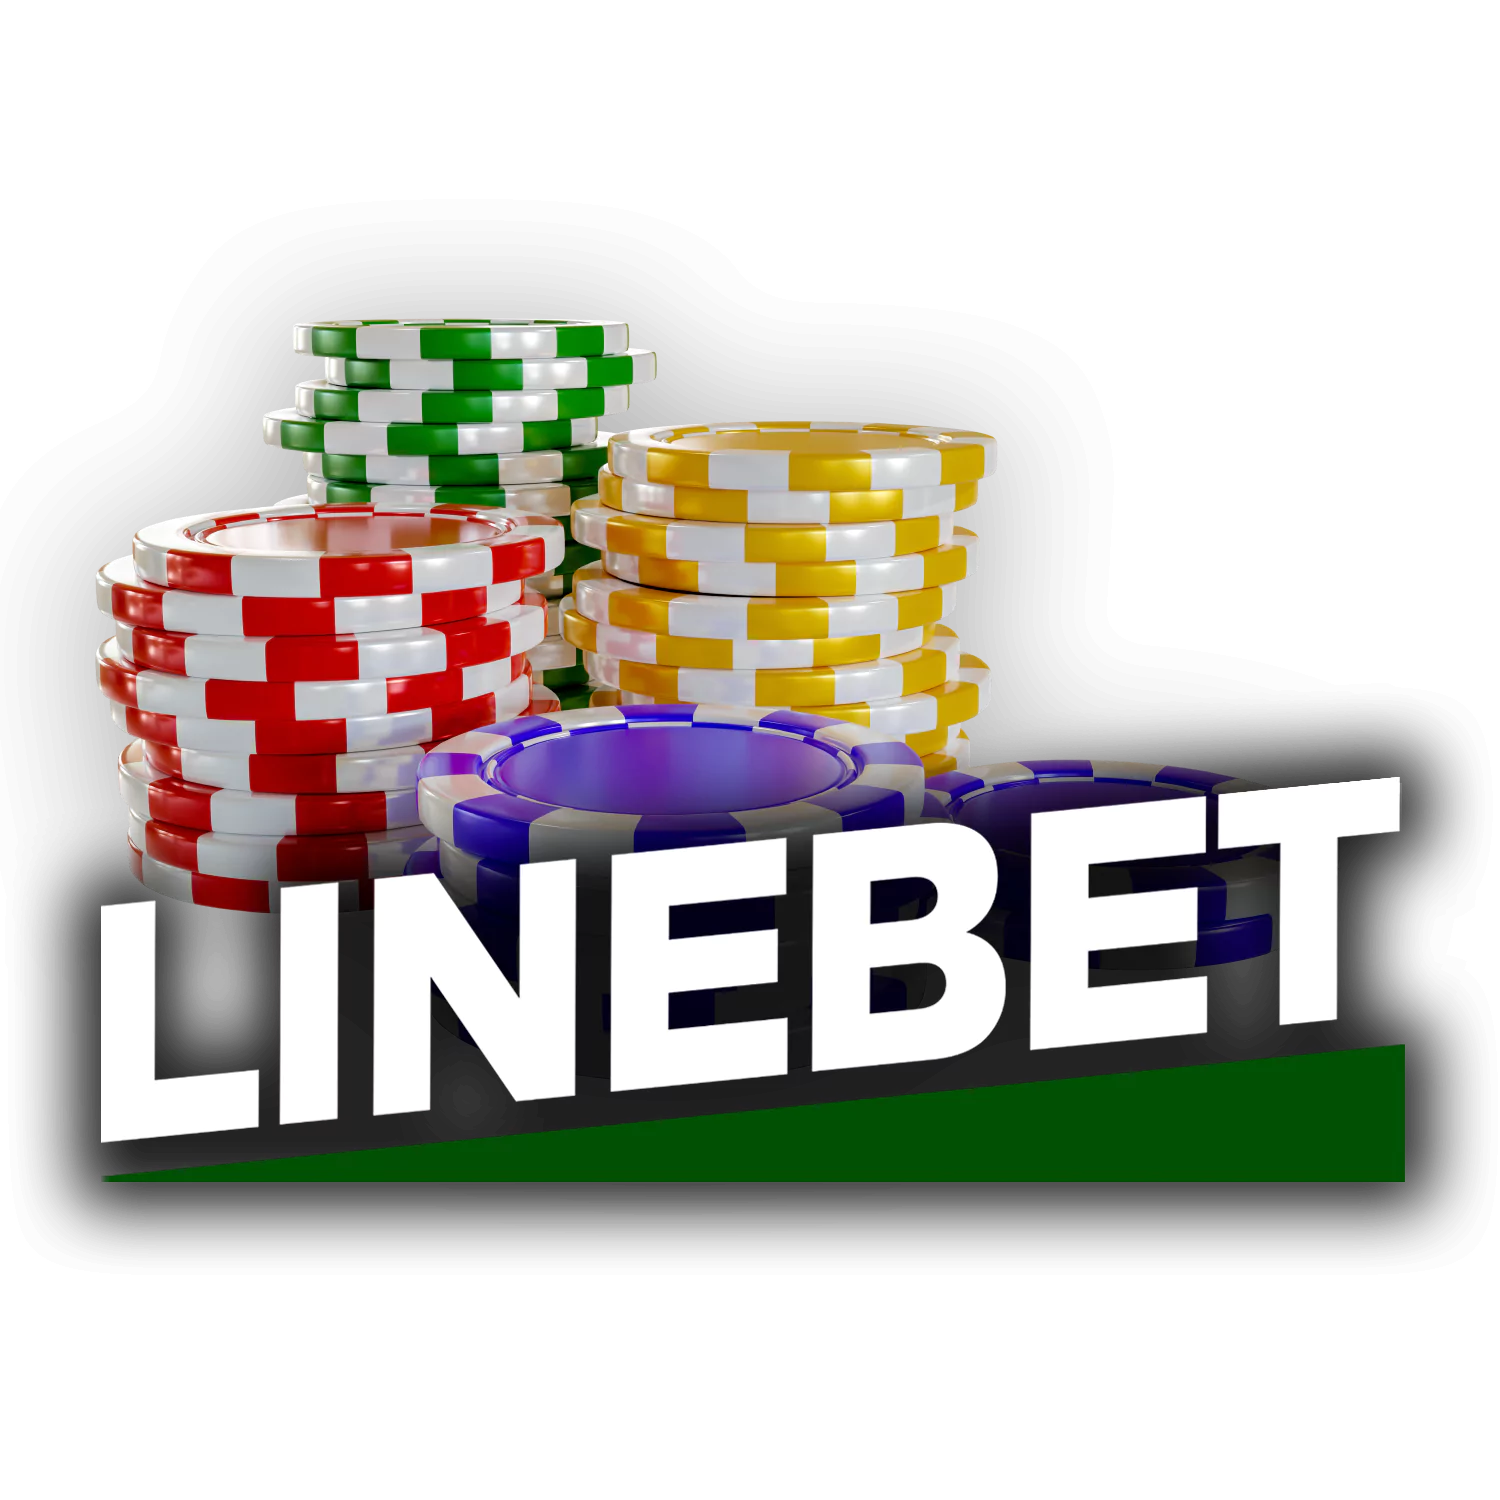 Follow the rules for playing responsibly on Linebet.